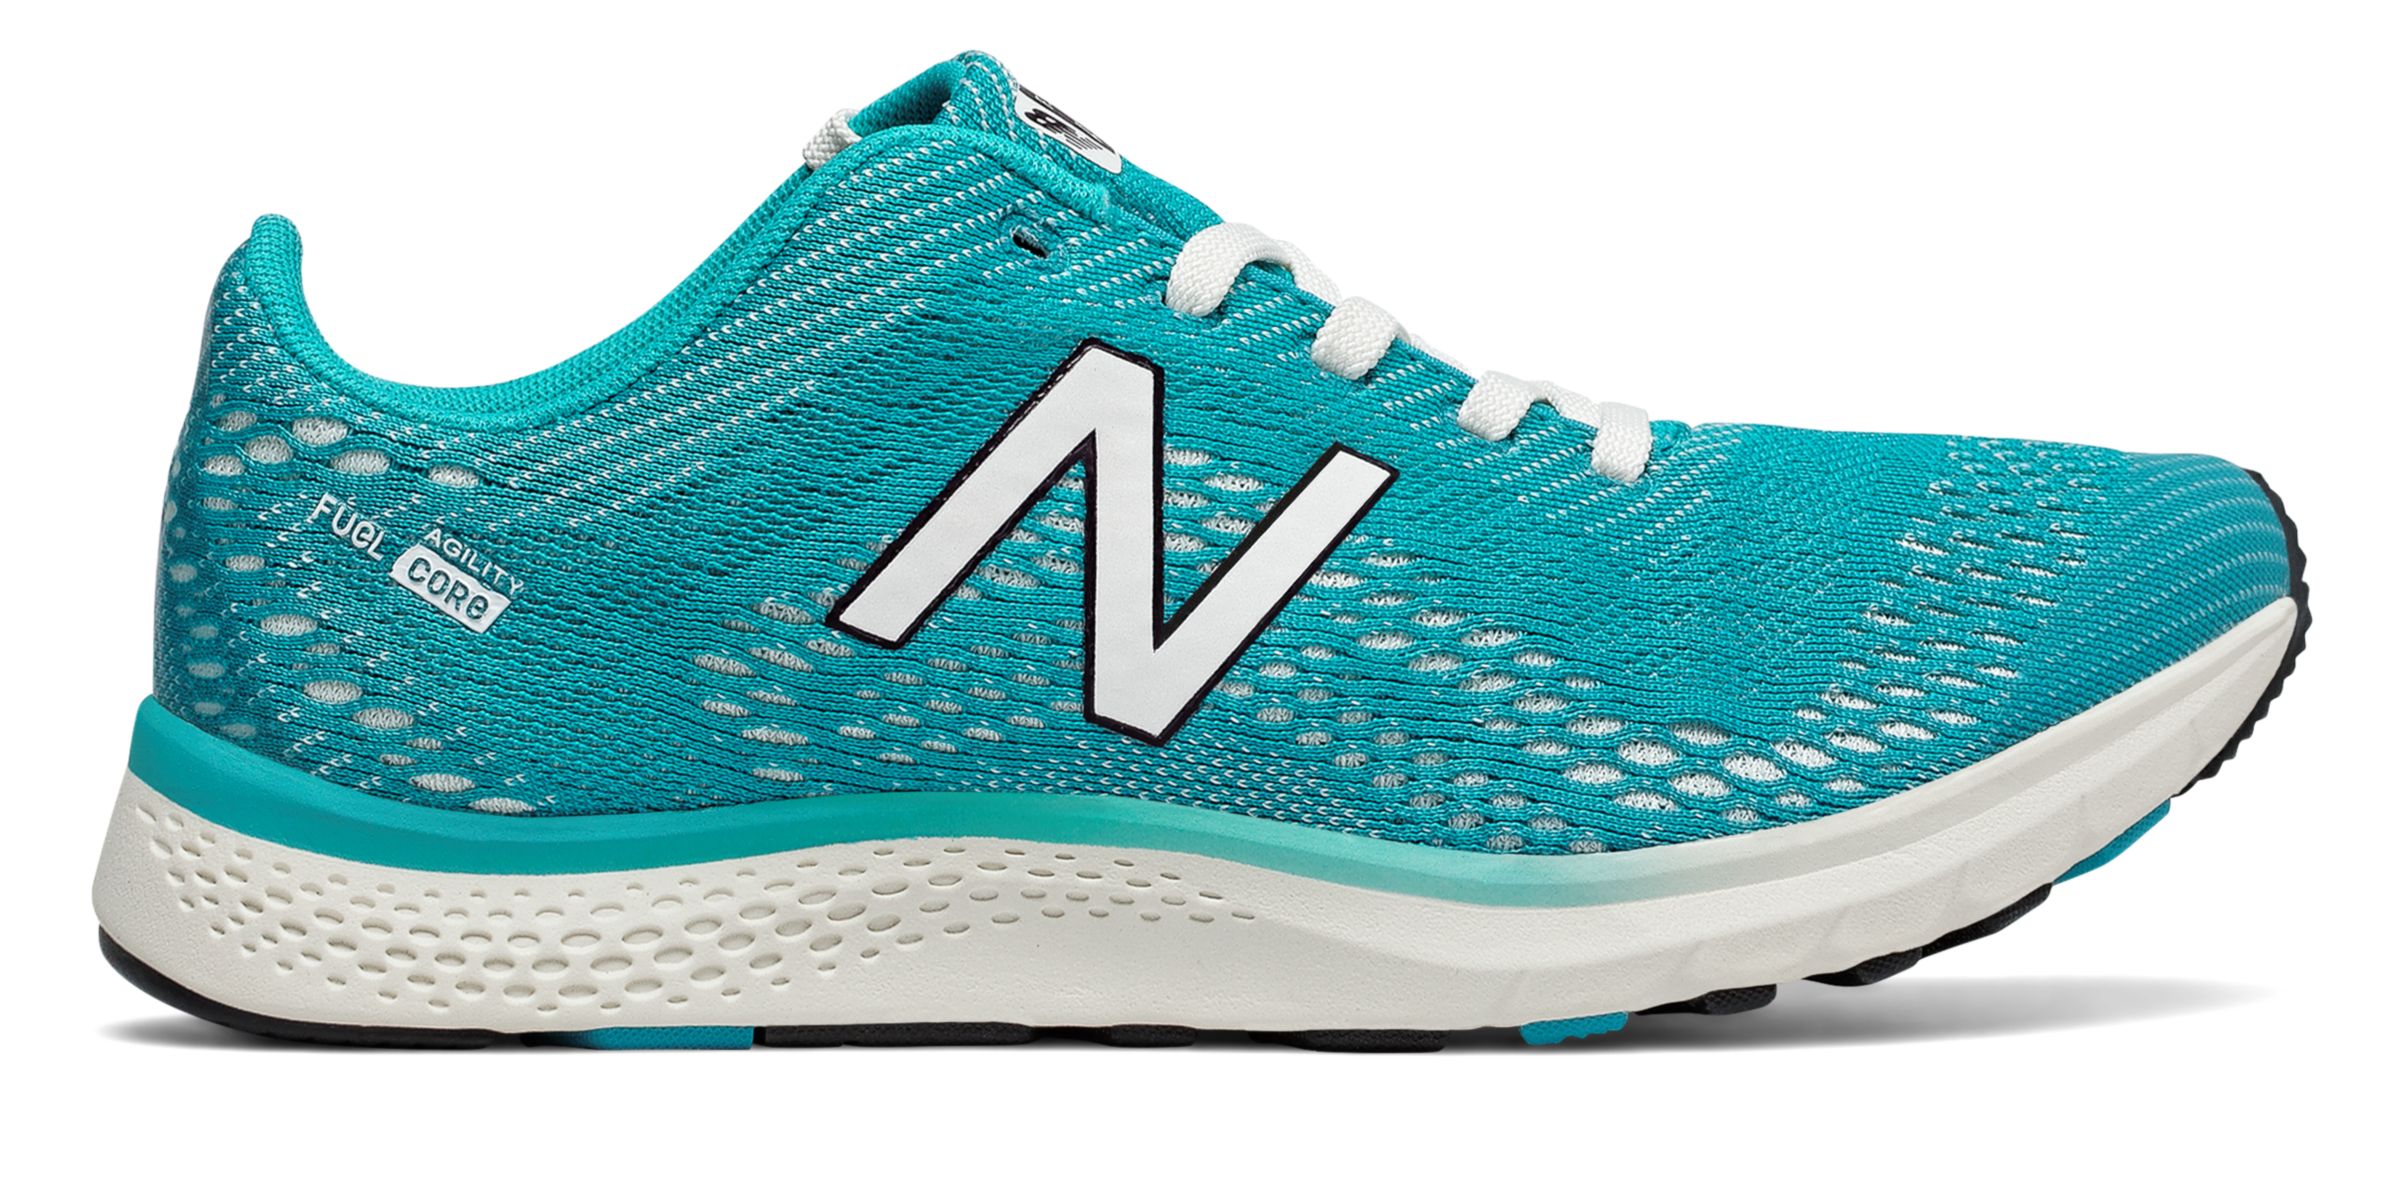 new balance fuelcore agility v2 trainer